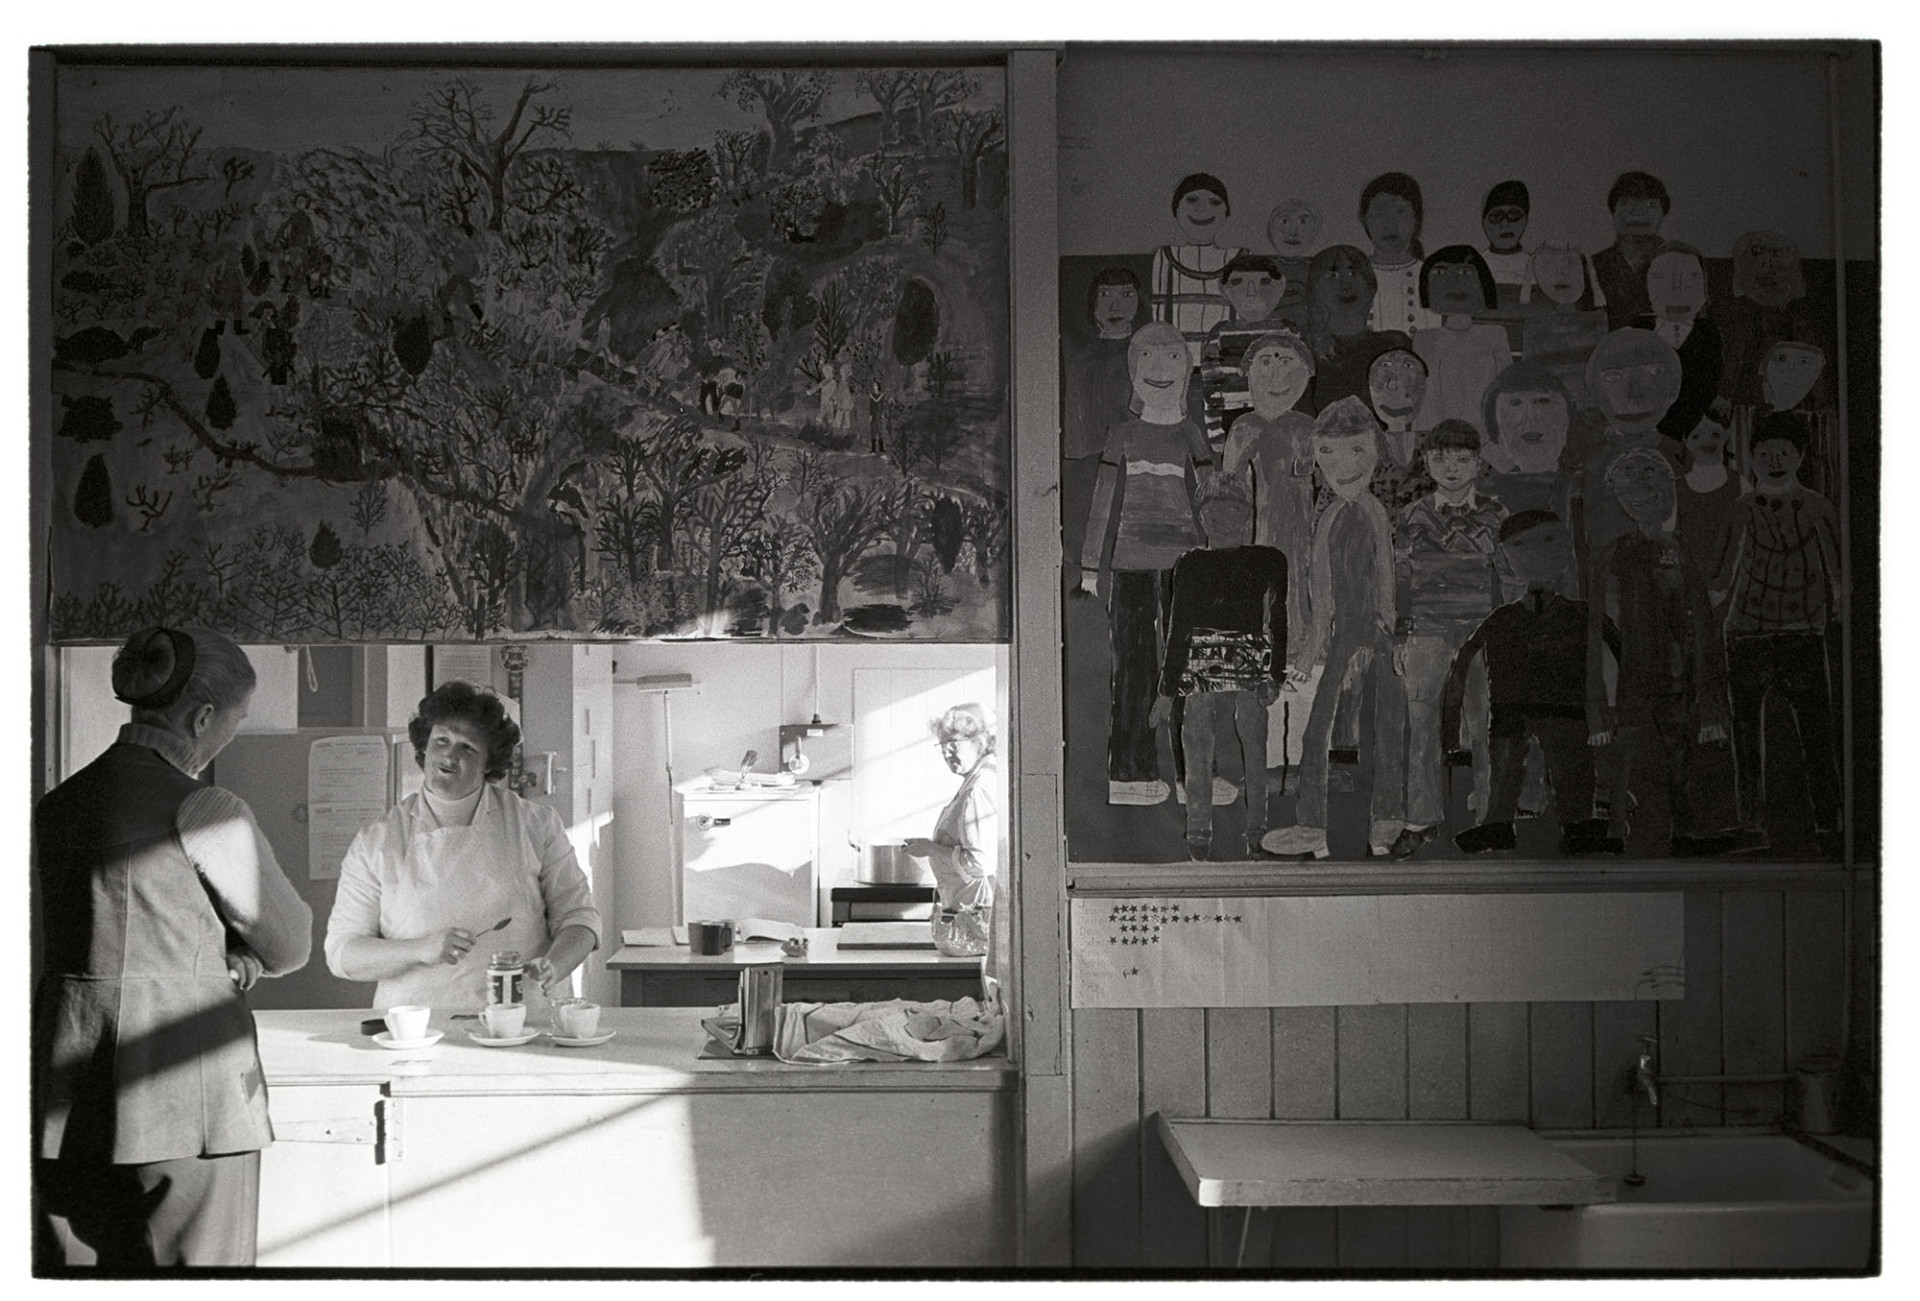 Teacher and school dinner lady chatting at counter of canteen with large paintings, murals. 
[A teacher and dinner lady talking at the serving hatch of the school canteen at Burrington Primary School. Children's schoolwork is displayed by the serving hatch.]